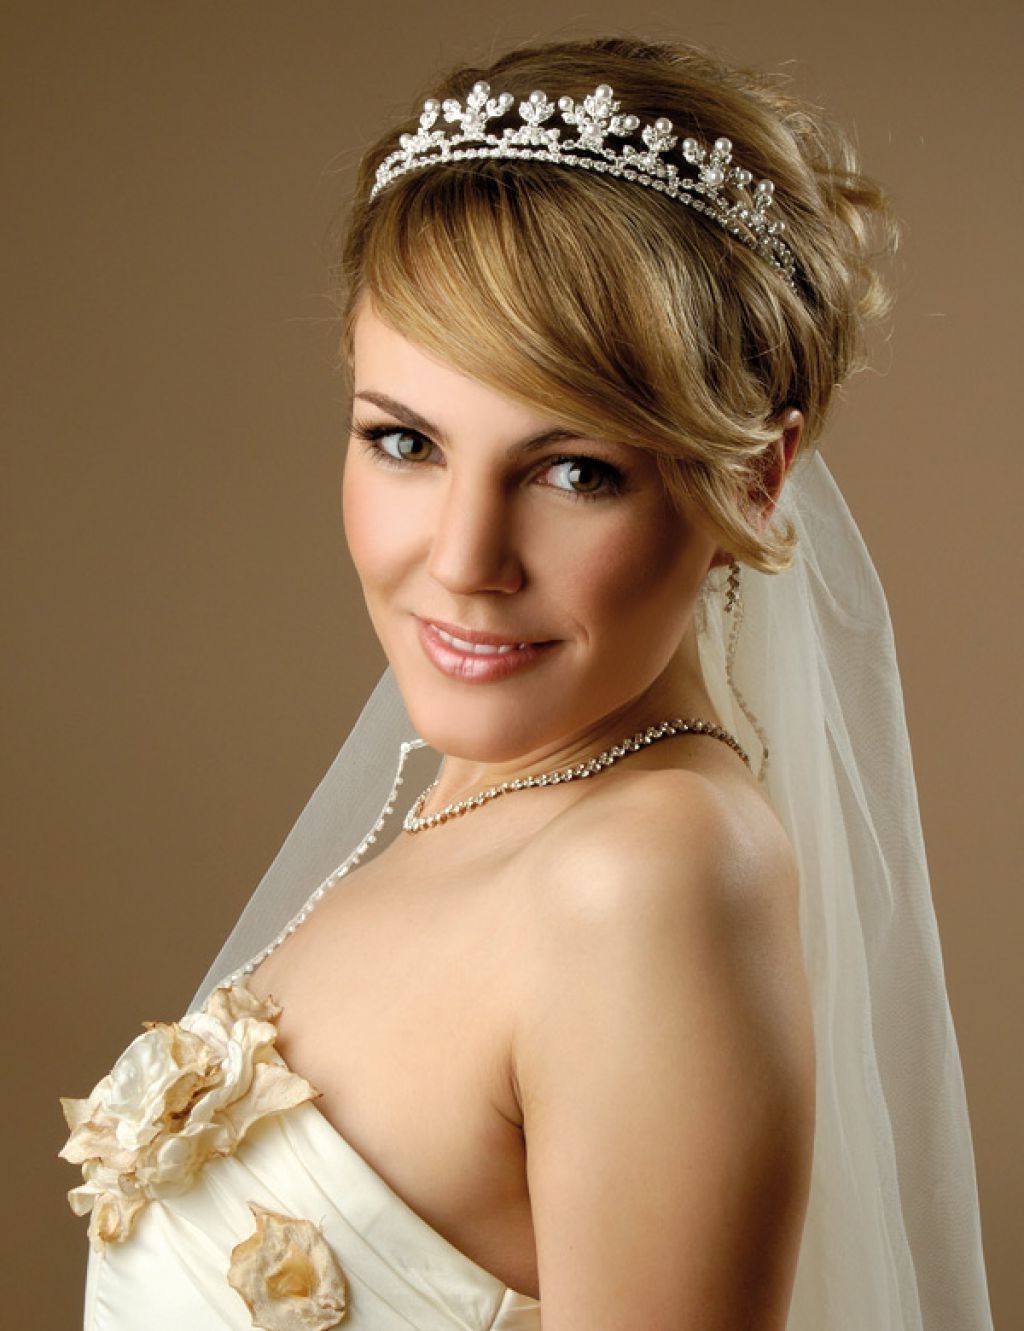 2021 Latest Wedding Hairstyles for Short Hair with Veil